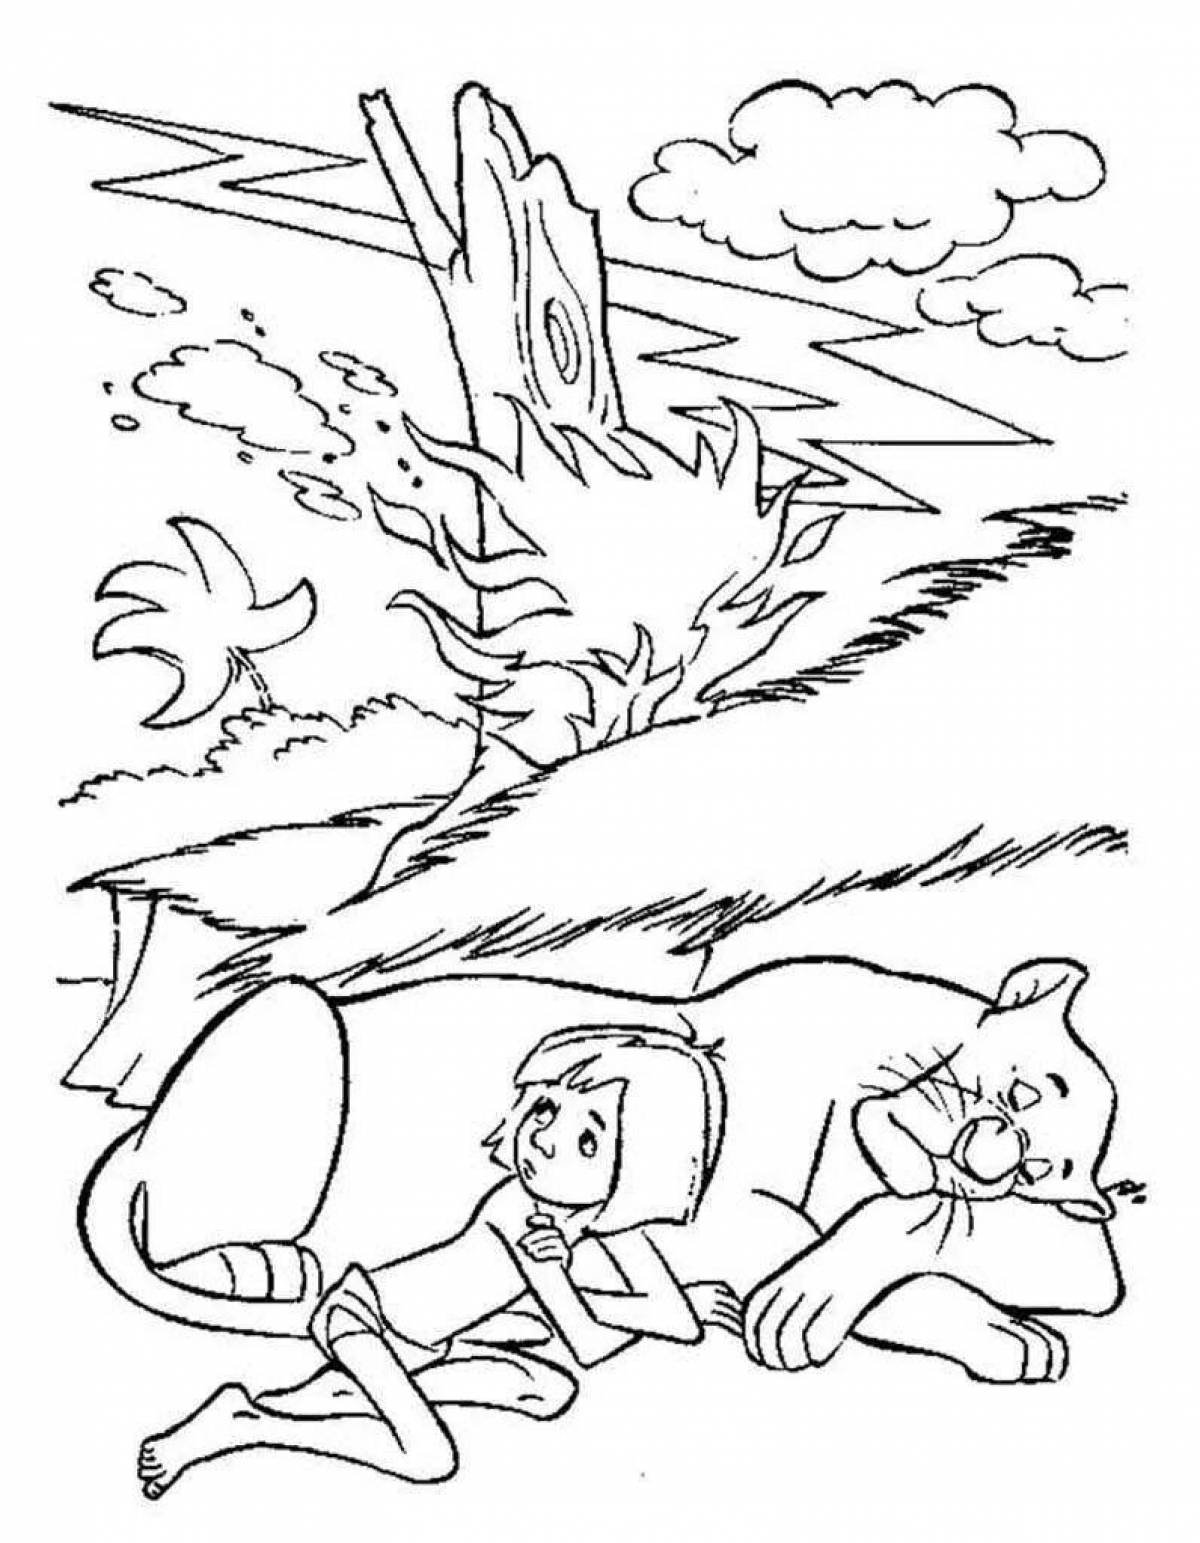 Amazing Mowgli and Bagheera Coloring Pages